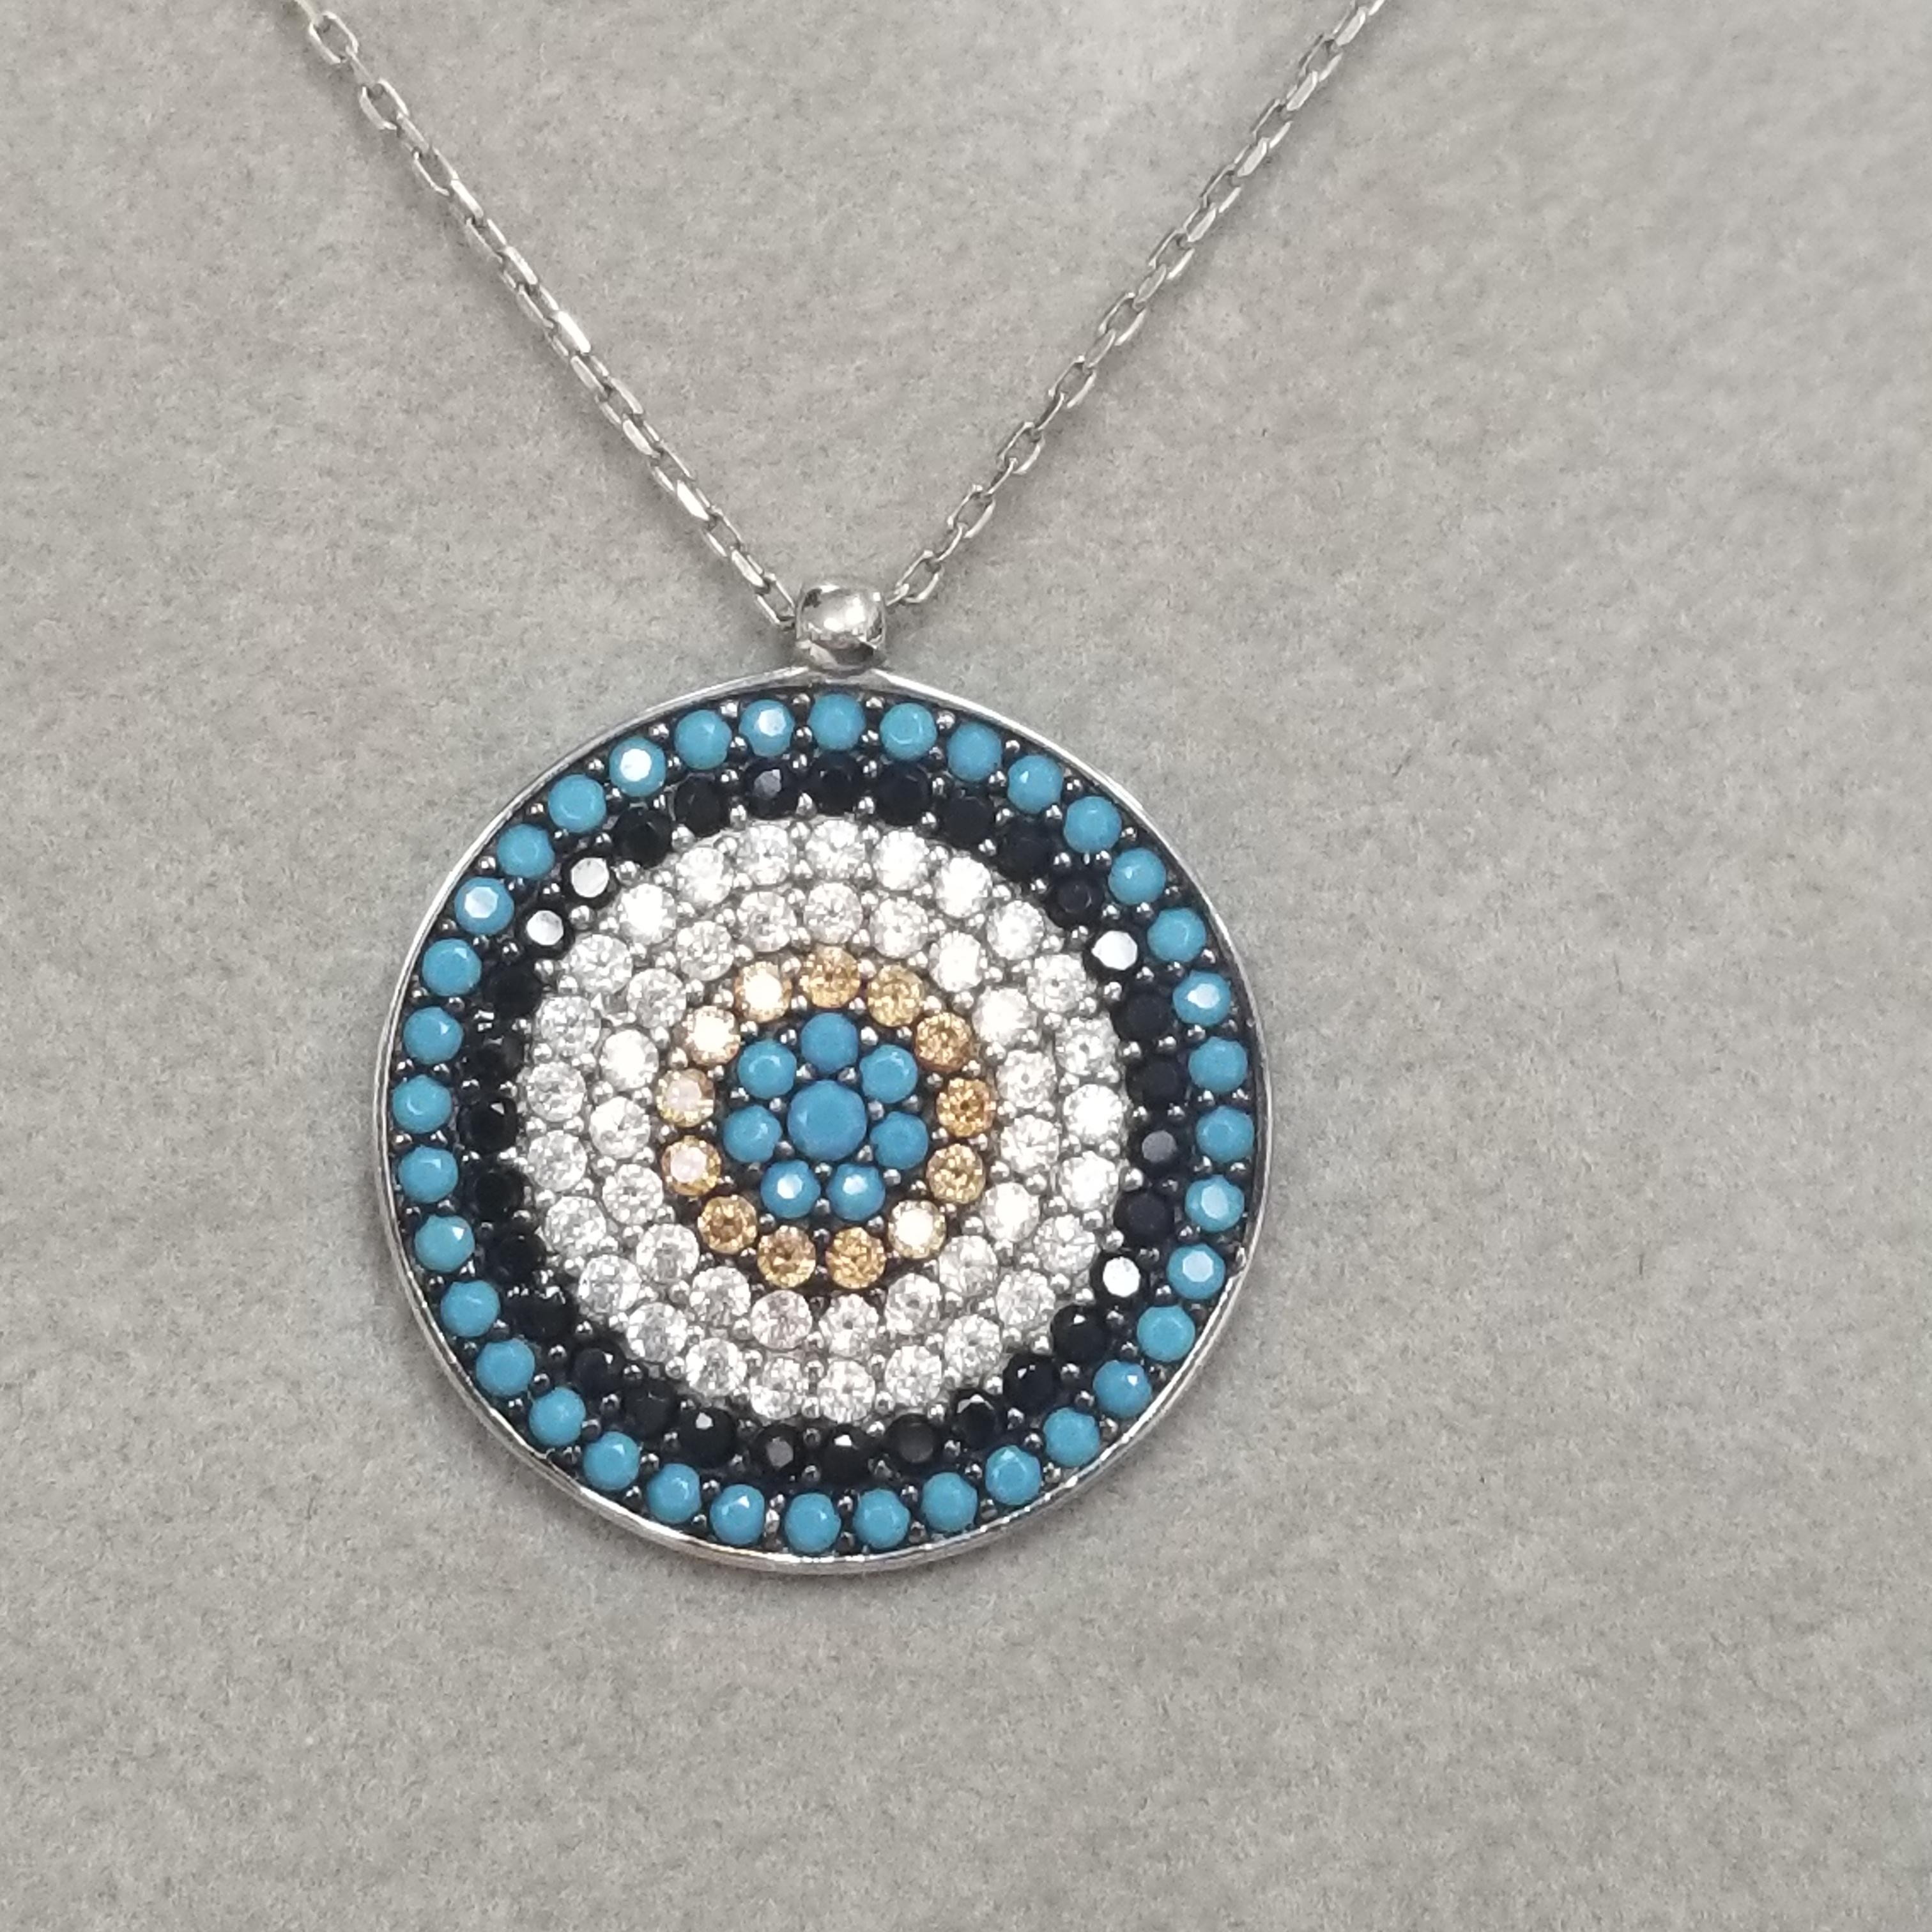 Sterling Silver pendant with turquoise and cubic on an 18 inch chain.